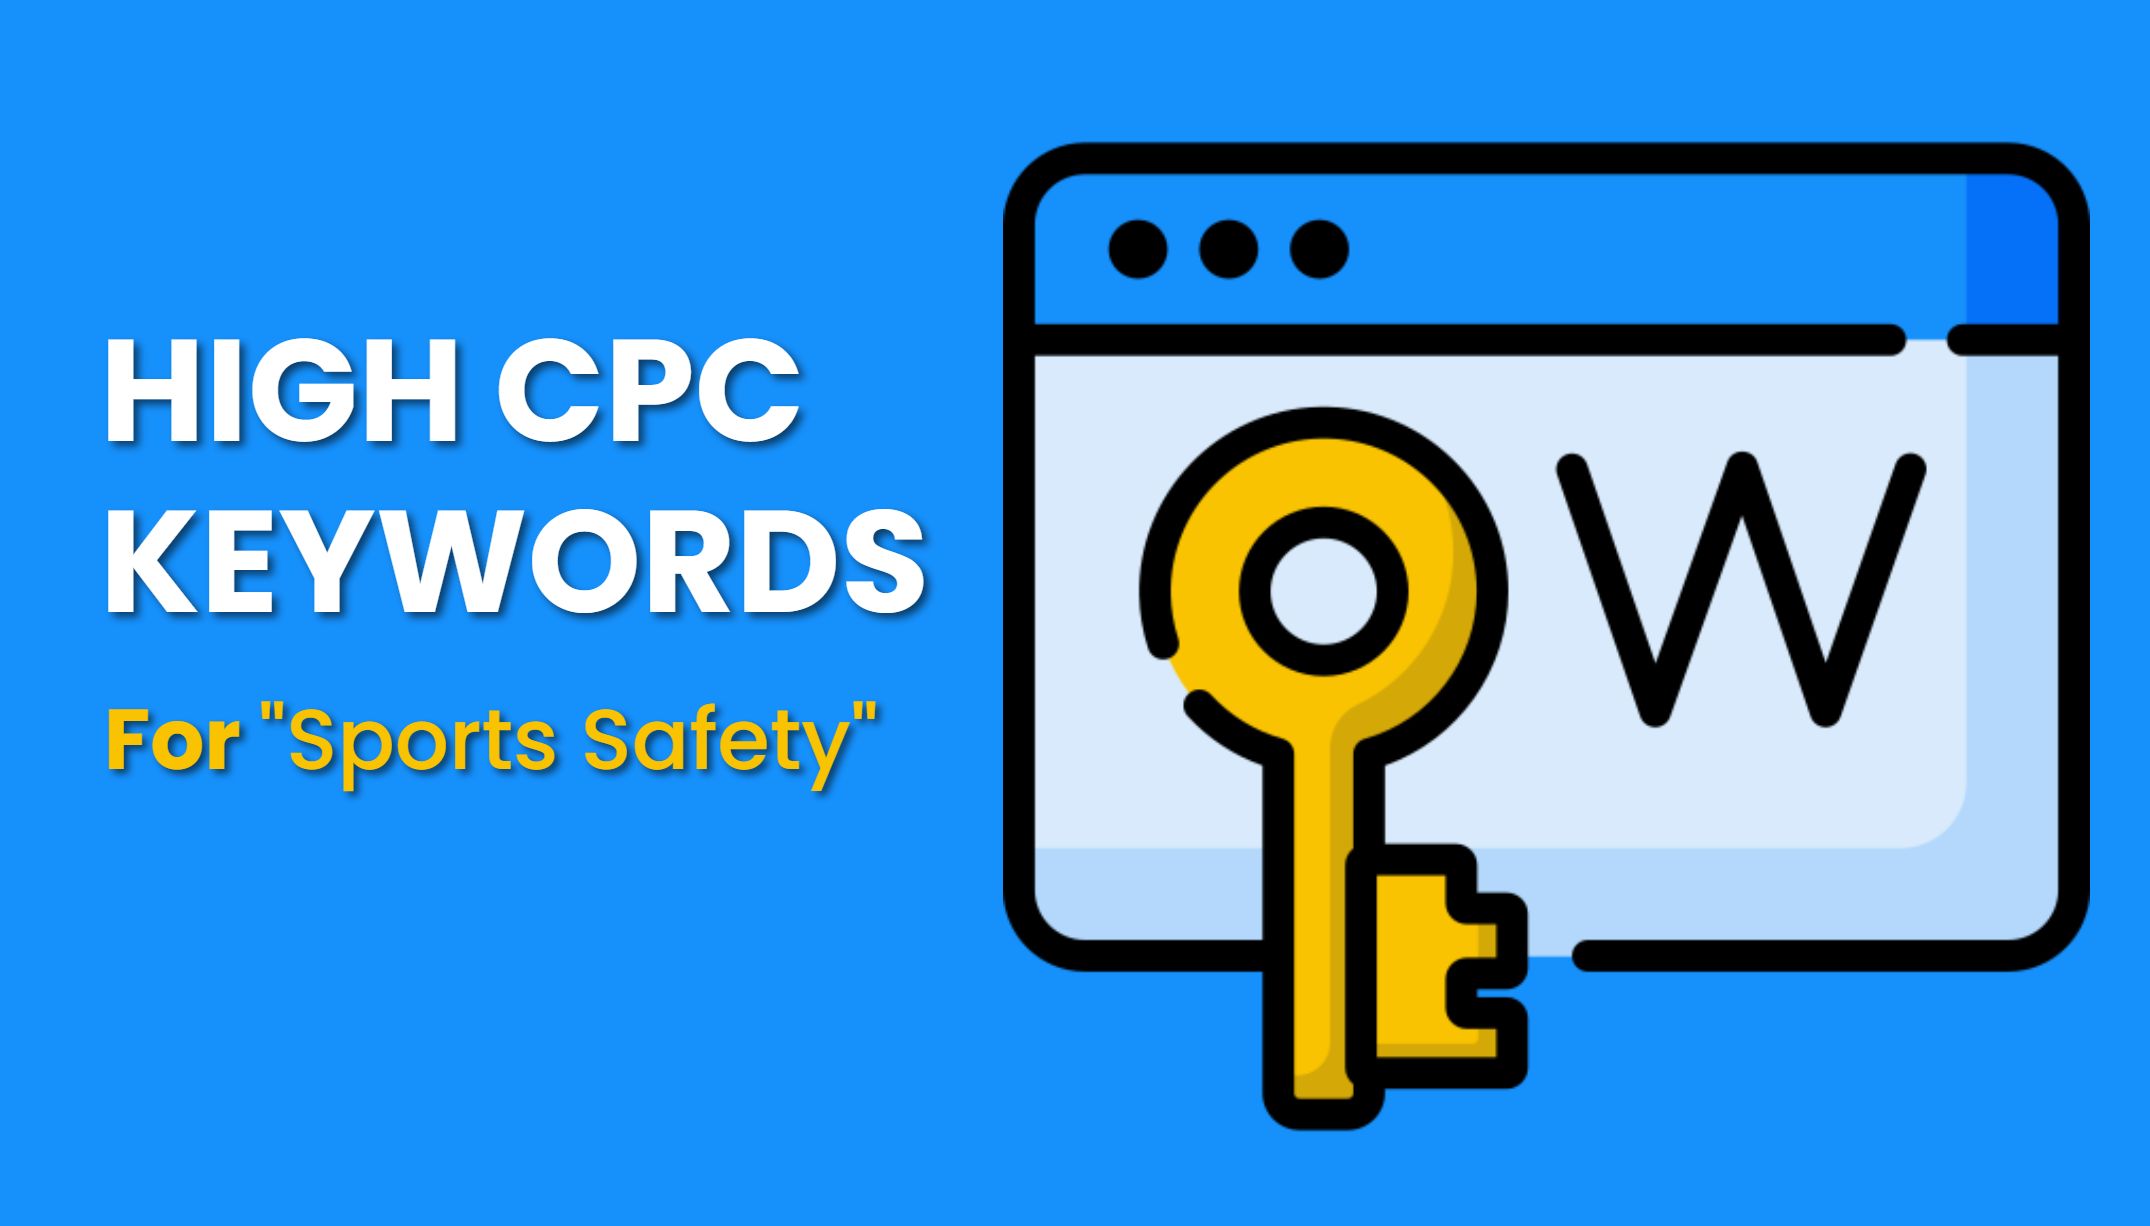 How to find High cpc keywords?